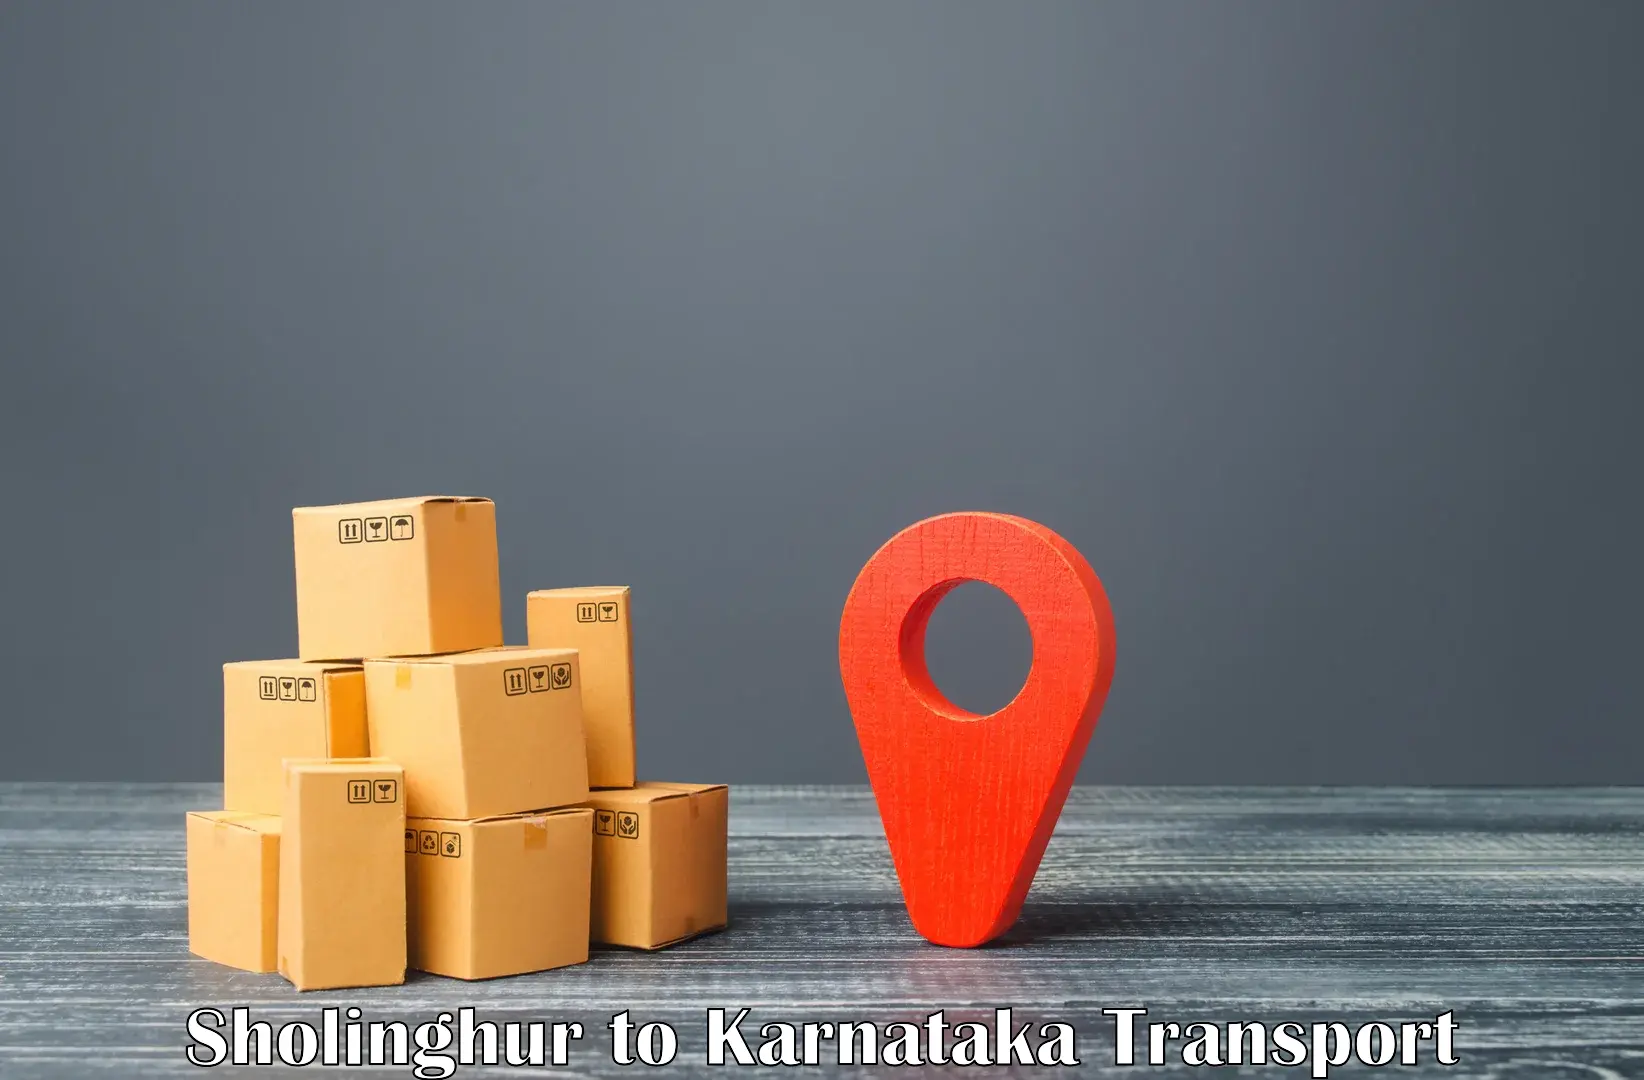 Air freight transport services in Sholinghur to Chamarajanagar